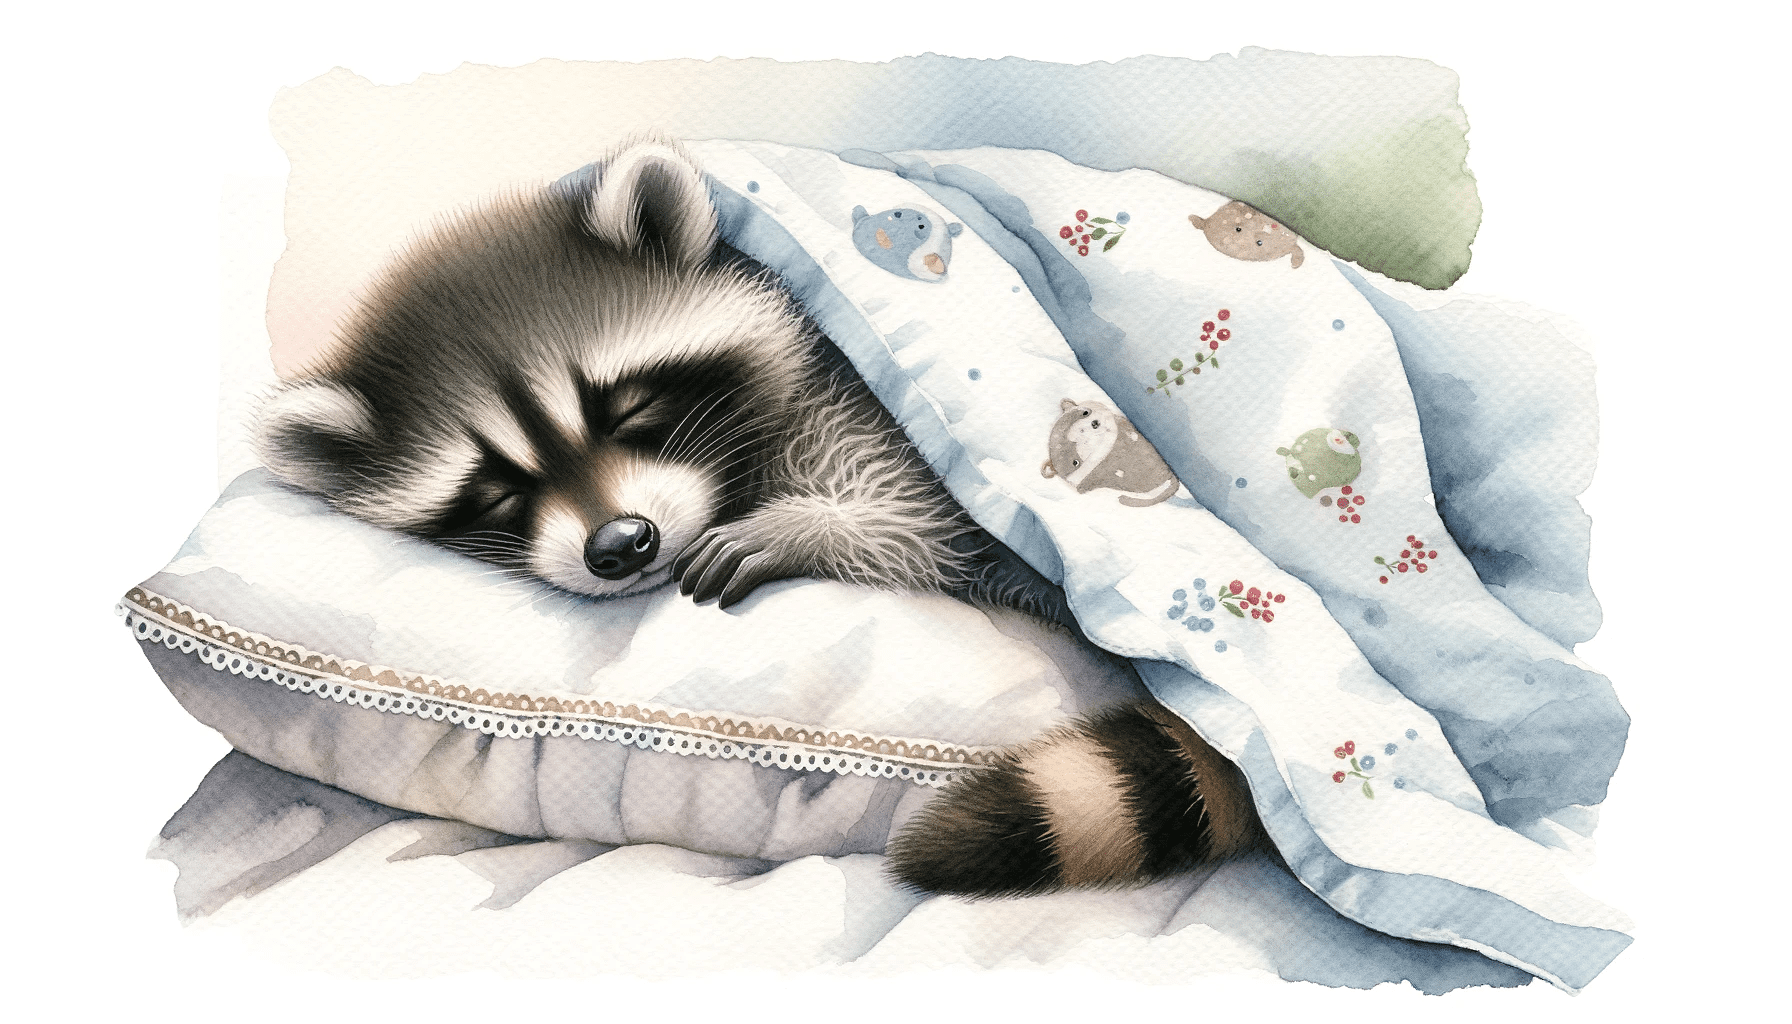 Baby Raccoon Sleeping on a Pillow Painting